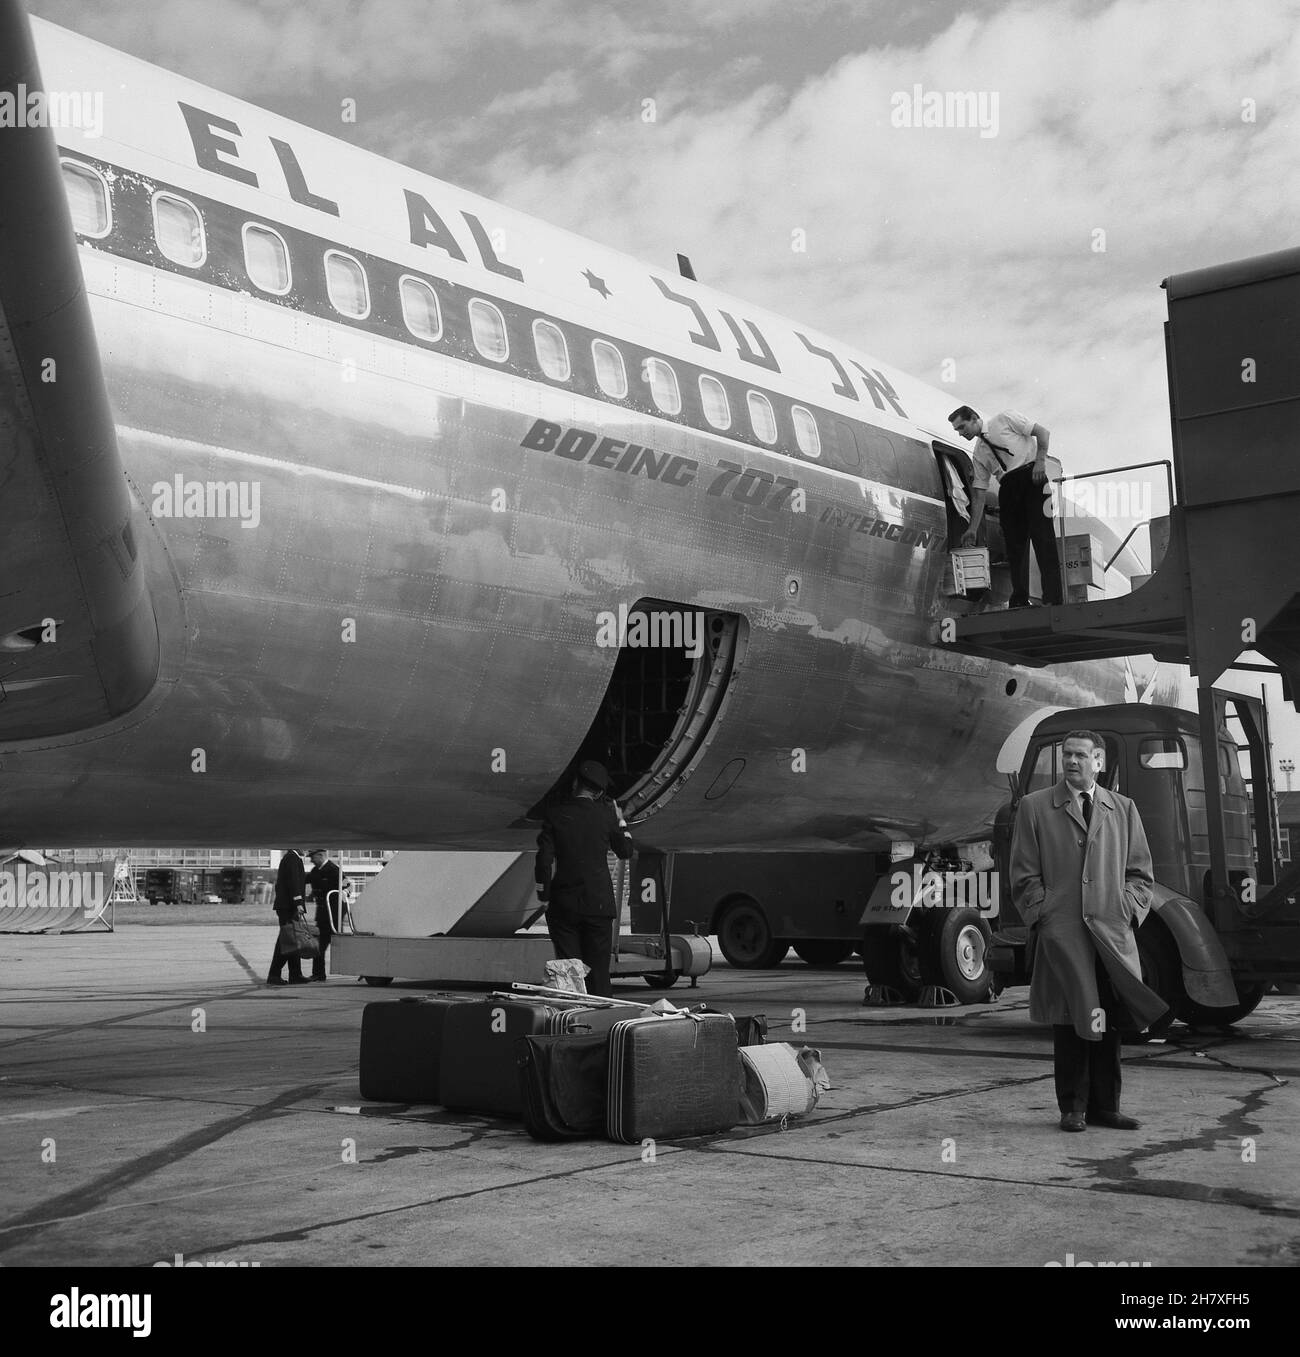 1960s, historical, an EL AL Boeing 707 jet aircraft parked at London Airport, with luggage on the ground and a man in a raincoat standing by it, London, England, UK. A commissary agent of the airline is up on the opened door of a container, loading goods or galleys onto the rear of the aircraft. Stock Photo